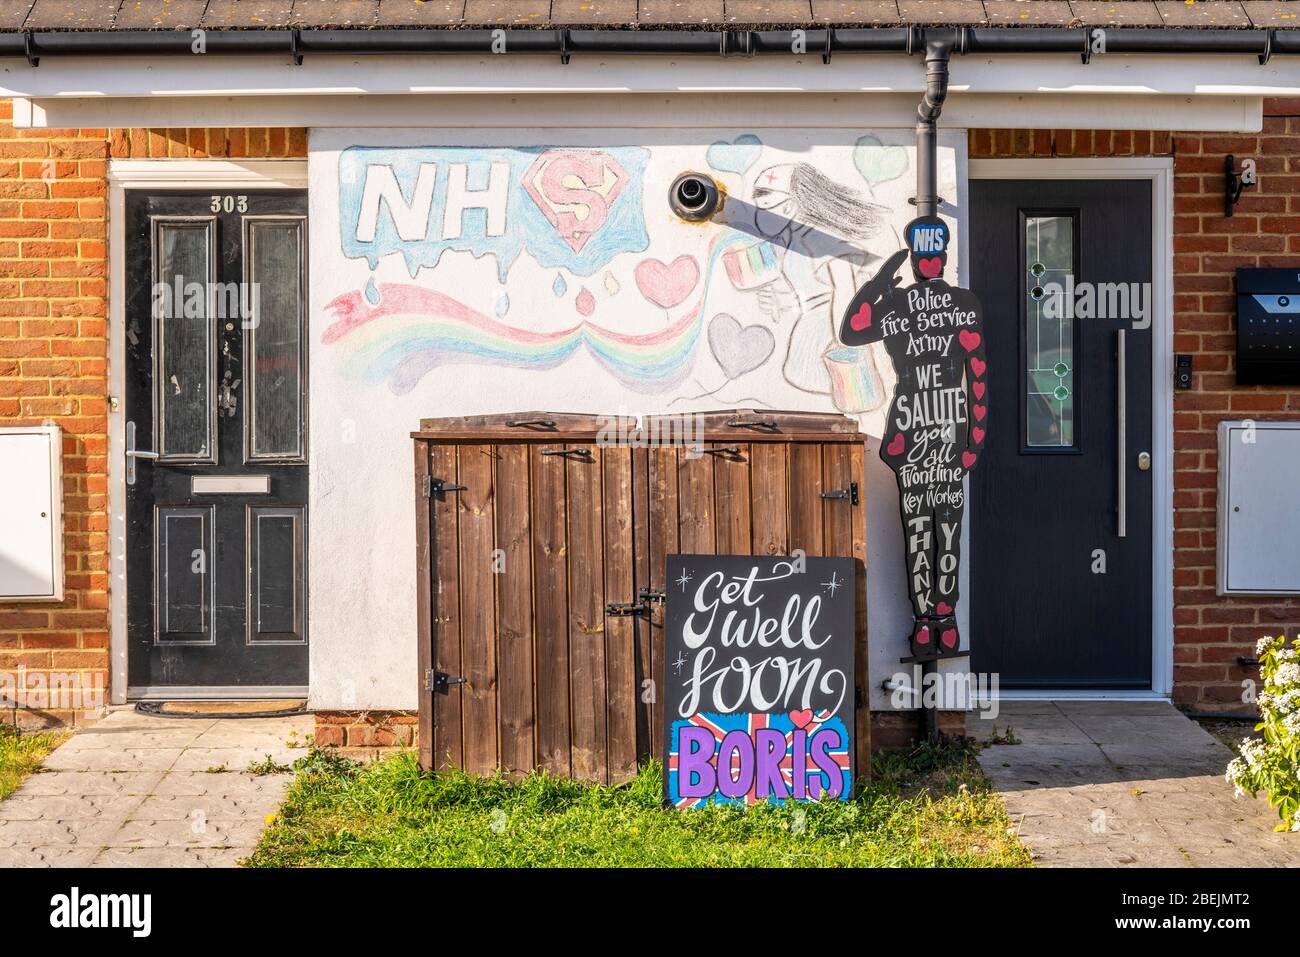 Get well soon Boris message, and messages thanking NHS and key workers during COVID-19 Coronavirus pandemic lockdown, in Southend on Sea, Essex, UK Stock Photo